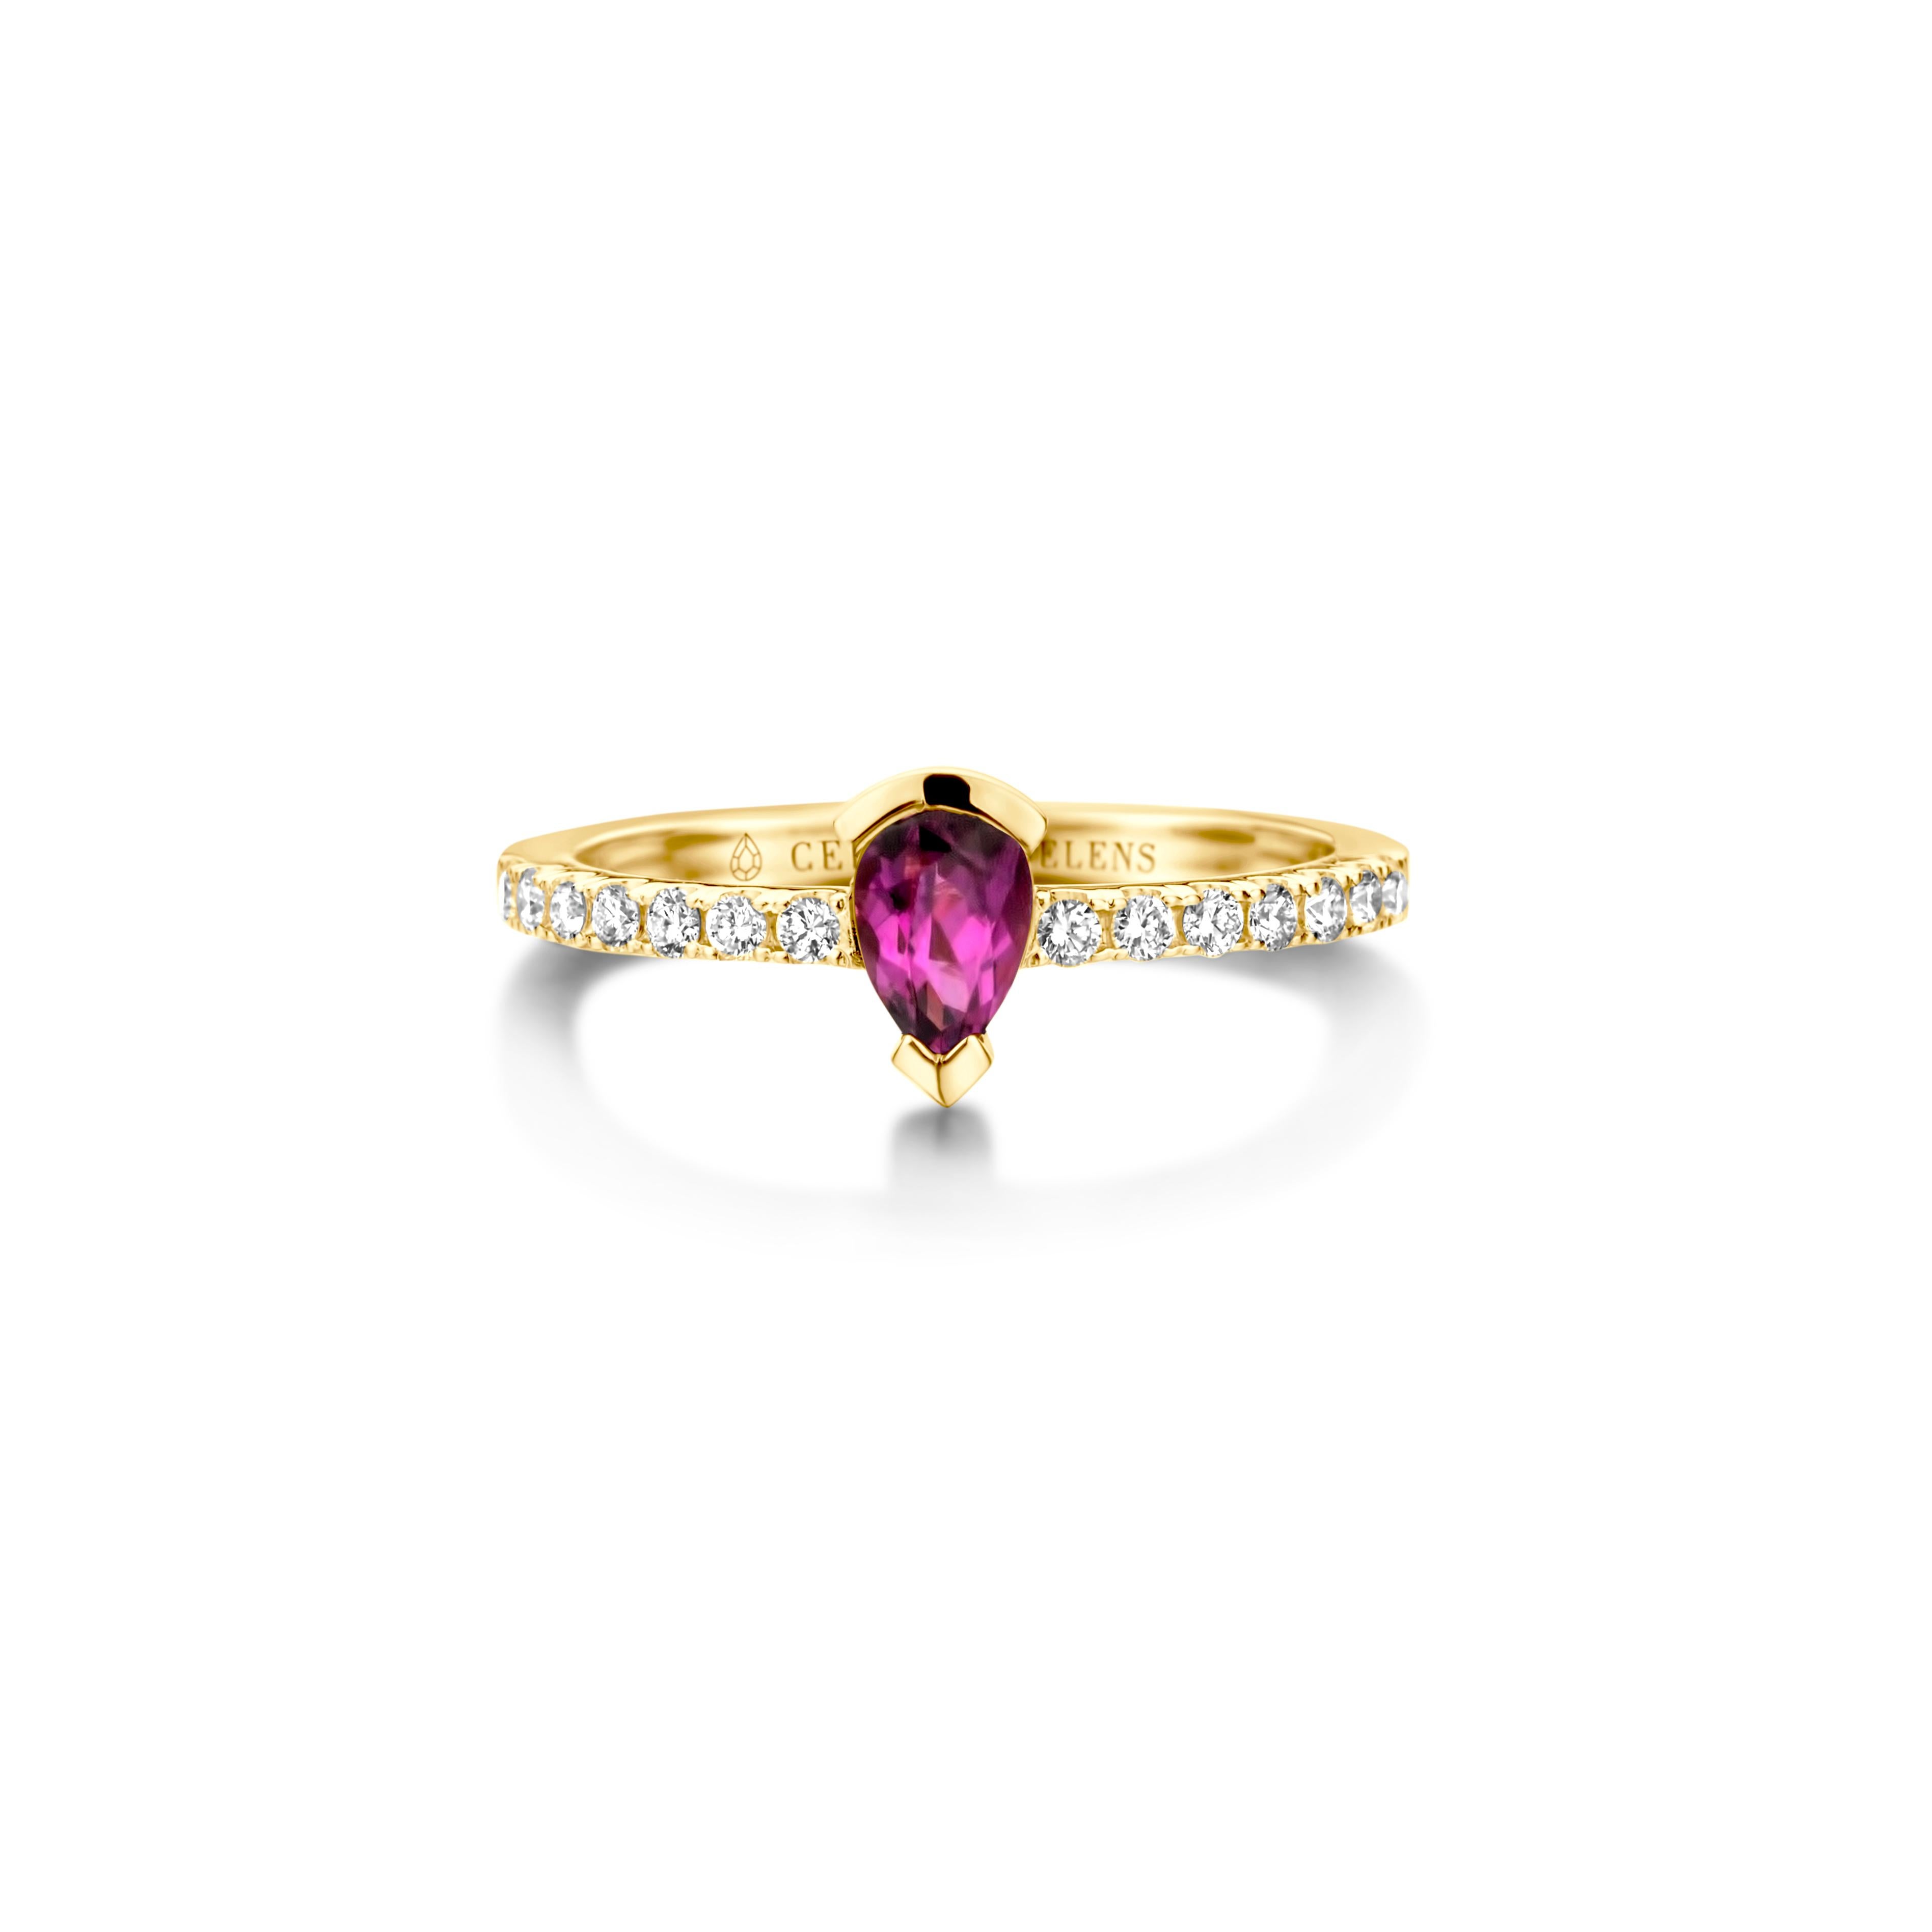 Adeline Straight ring in 18Kt white gold set with a pear-shaped royal purple garnet and 0,24 Ct of white brilliant cut diamonds - VS F quality. Also, available in yellow gold and white gold. Celine Roelens, a goldsmith and gemologist, is specialized